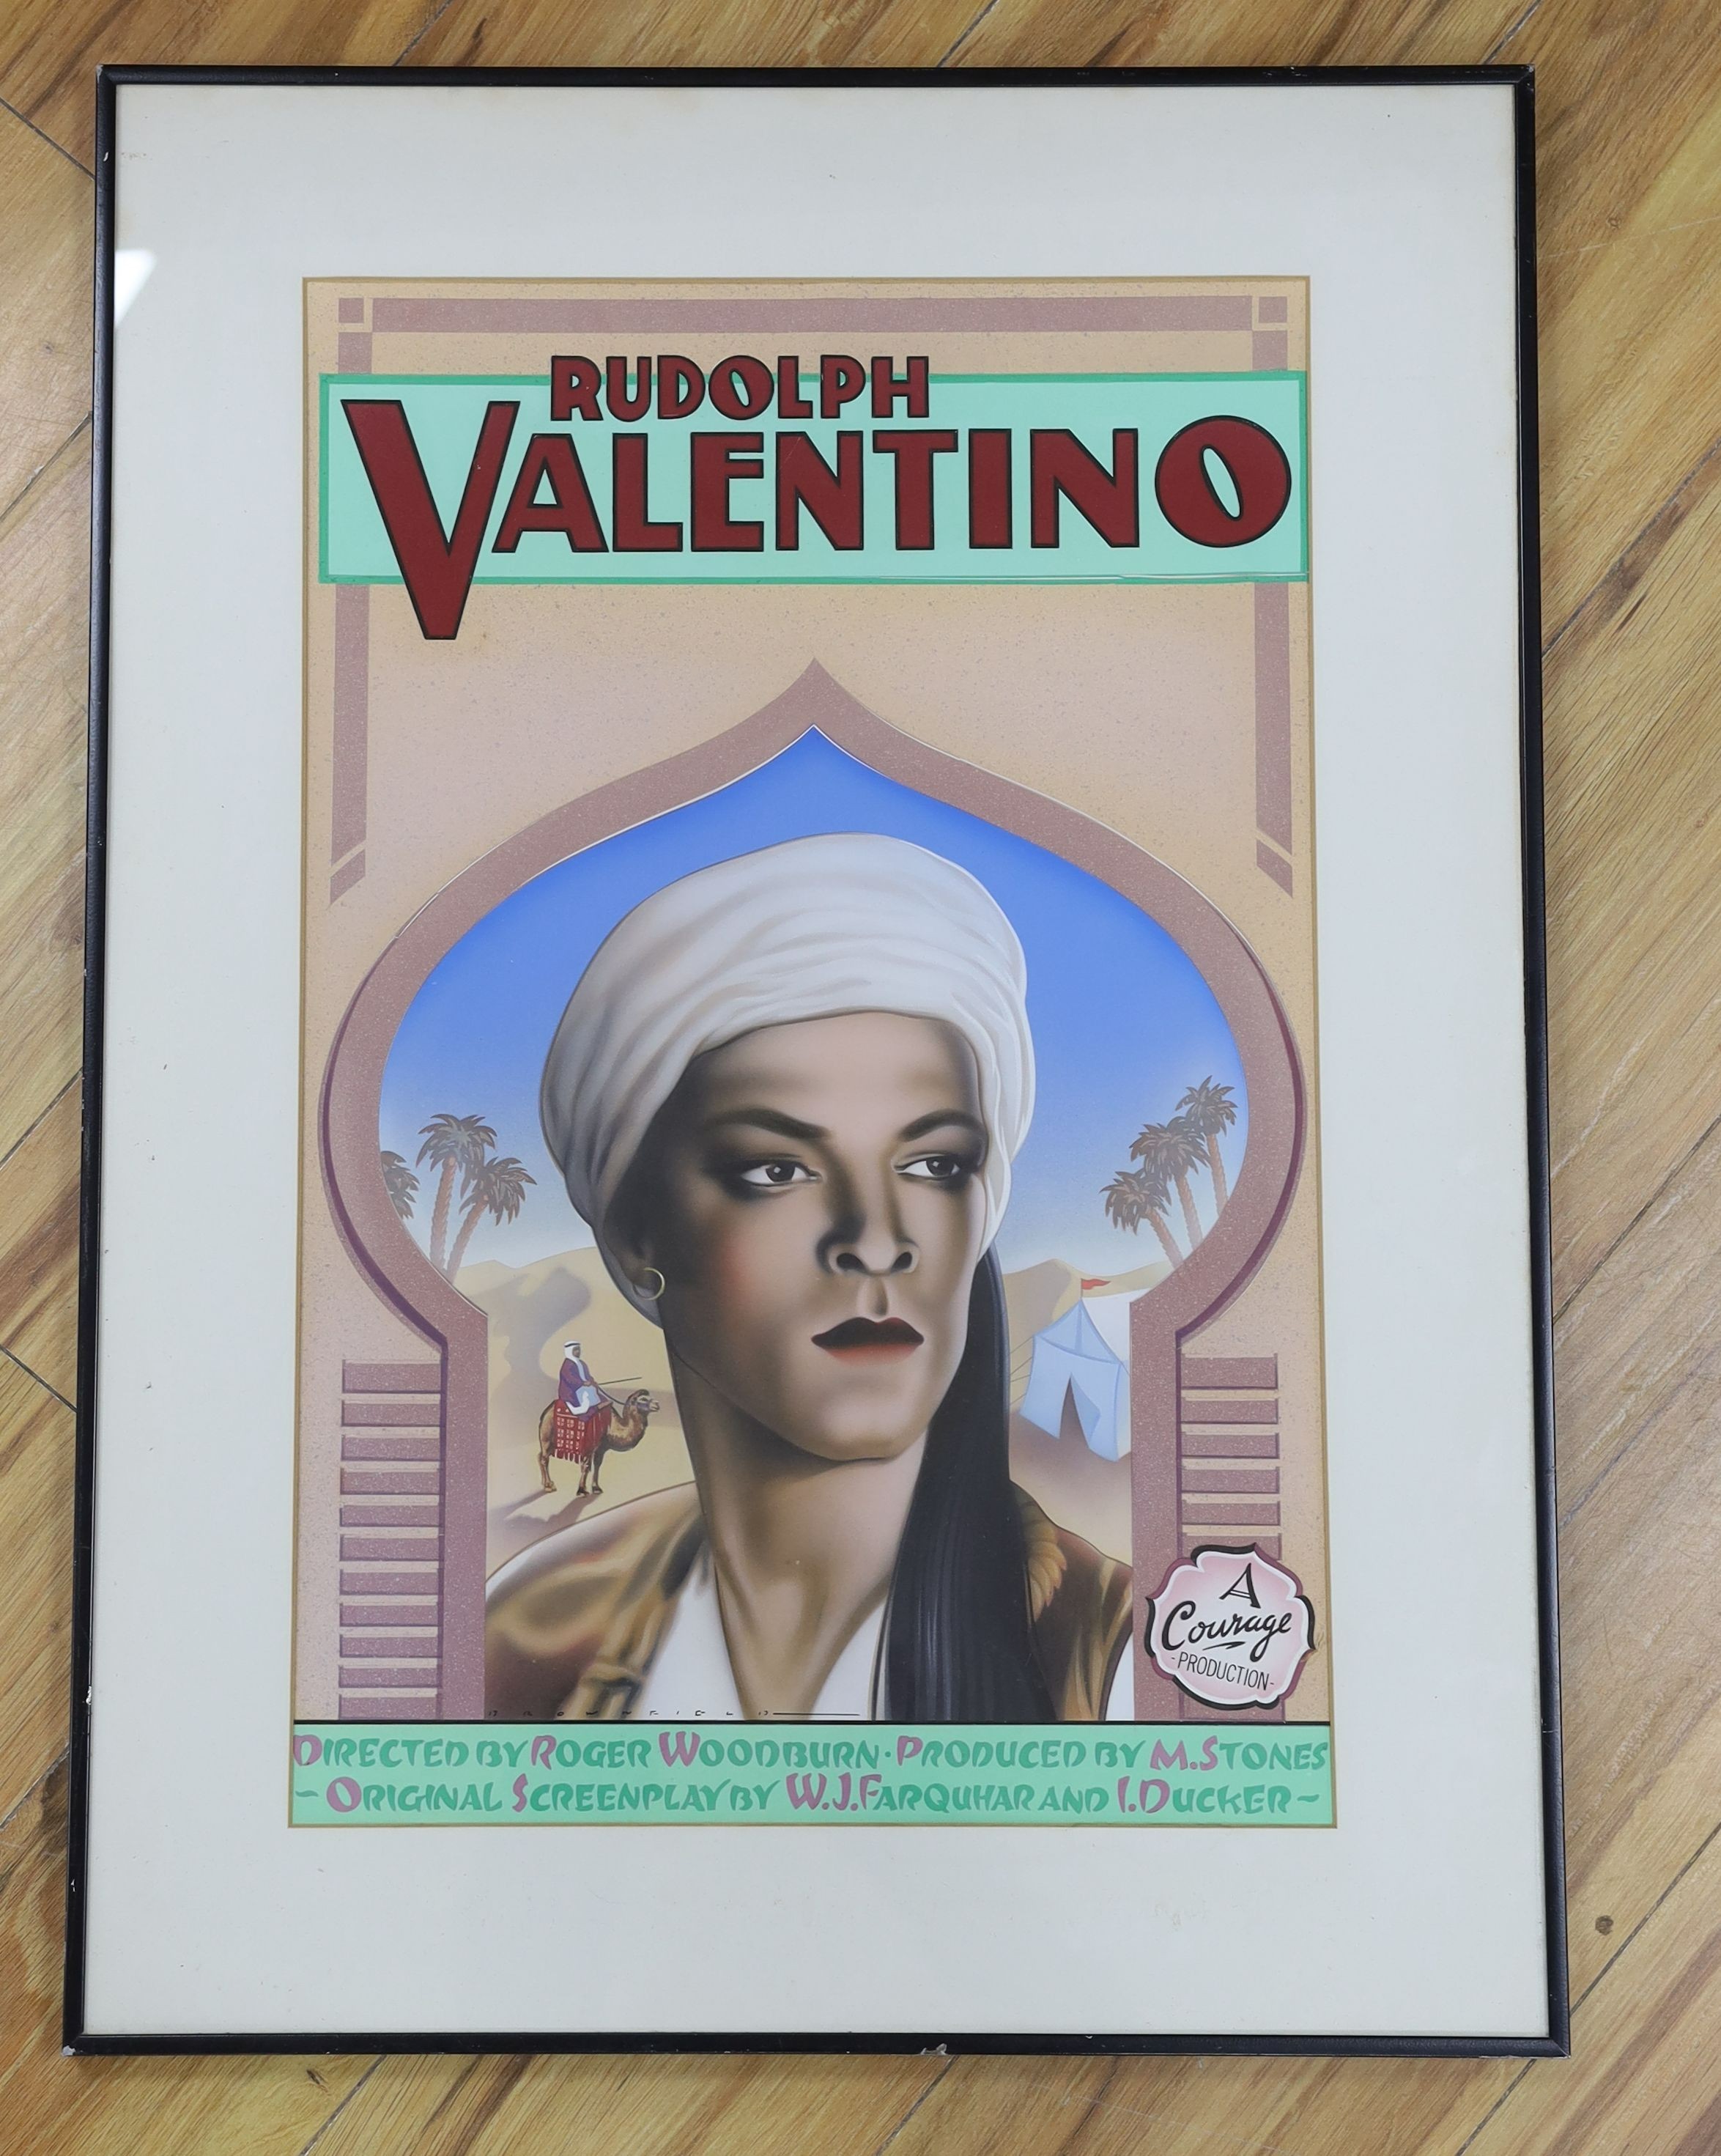 Brownfield, gouache and airbrush, Original artwork for Rudolph Valentino film poster, signed, 57 x 37cm